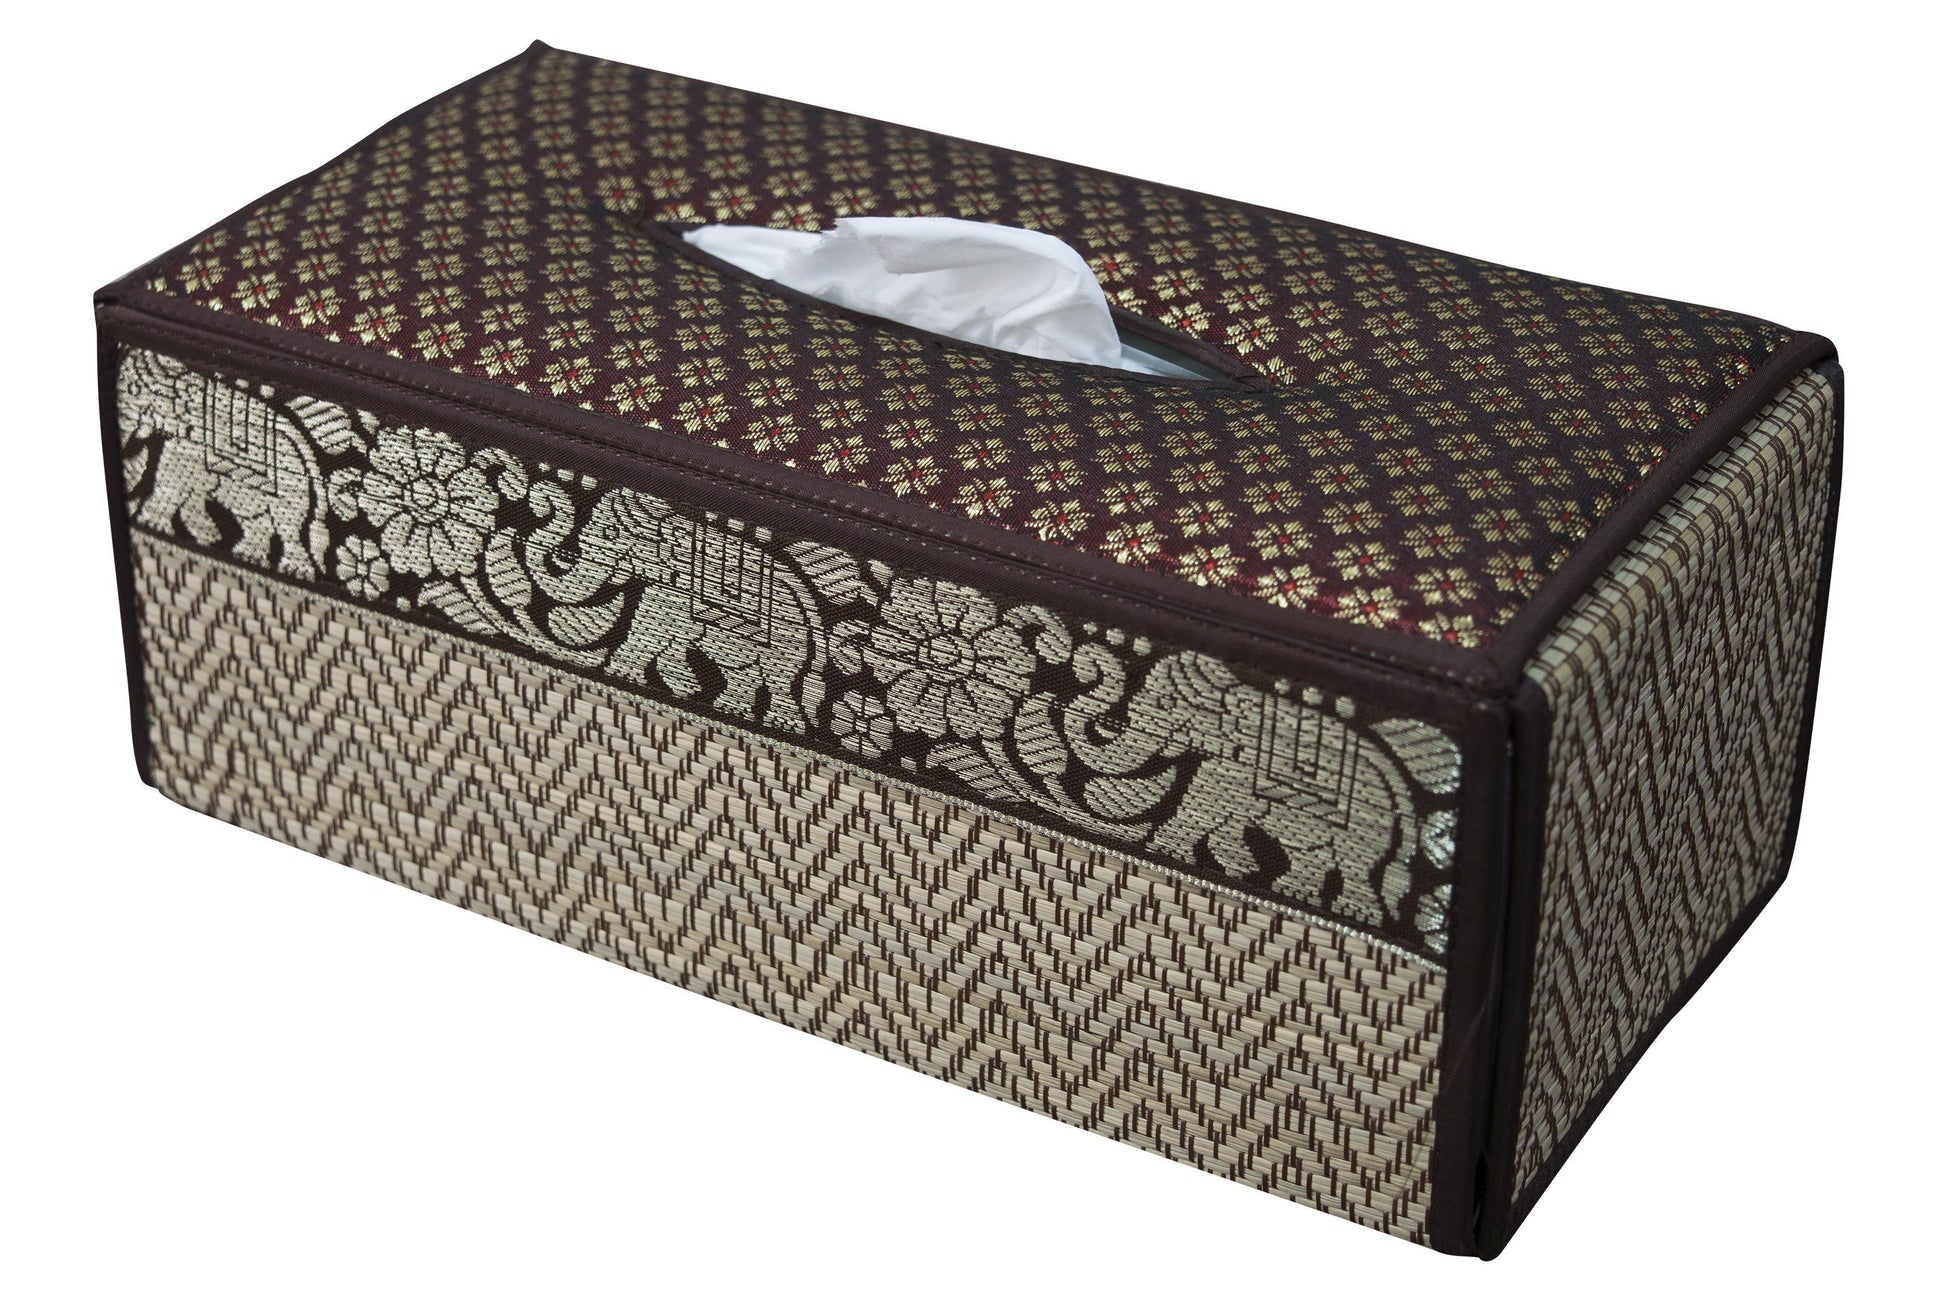 Reed TISSUE BOX cover case - CCCollections